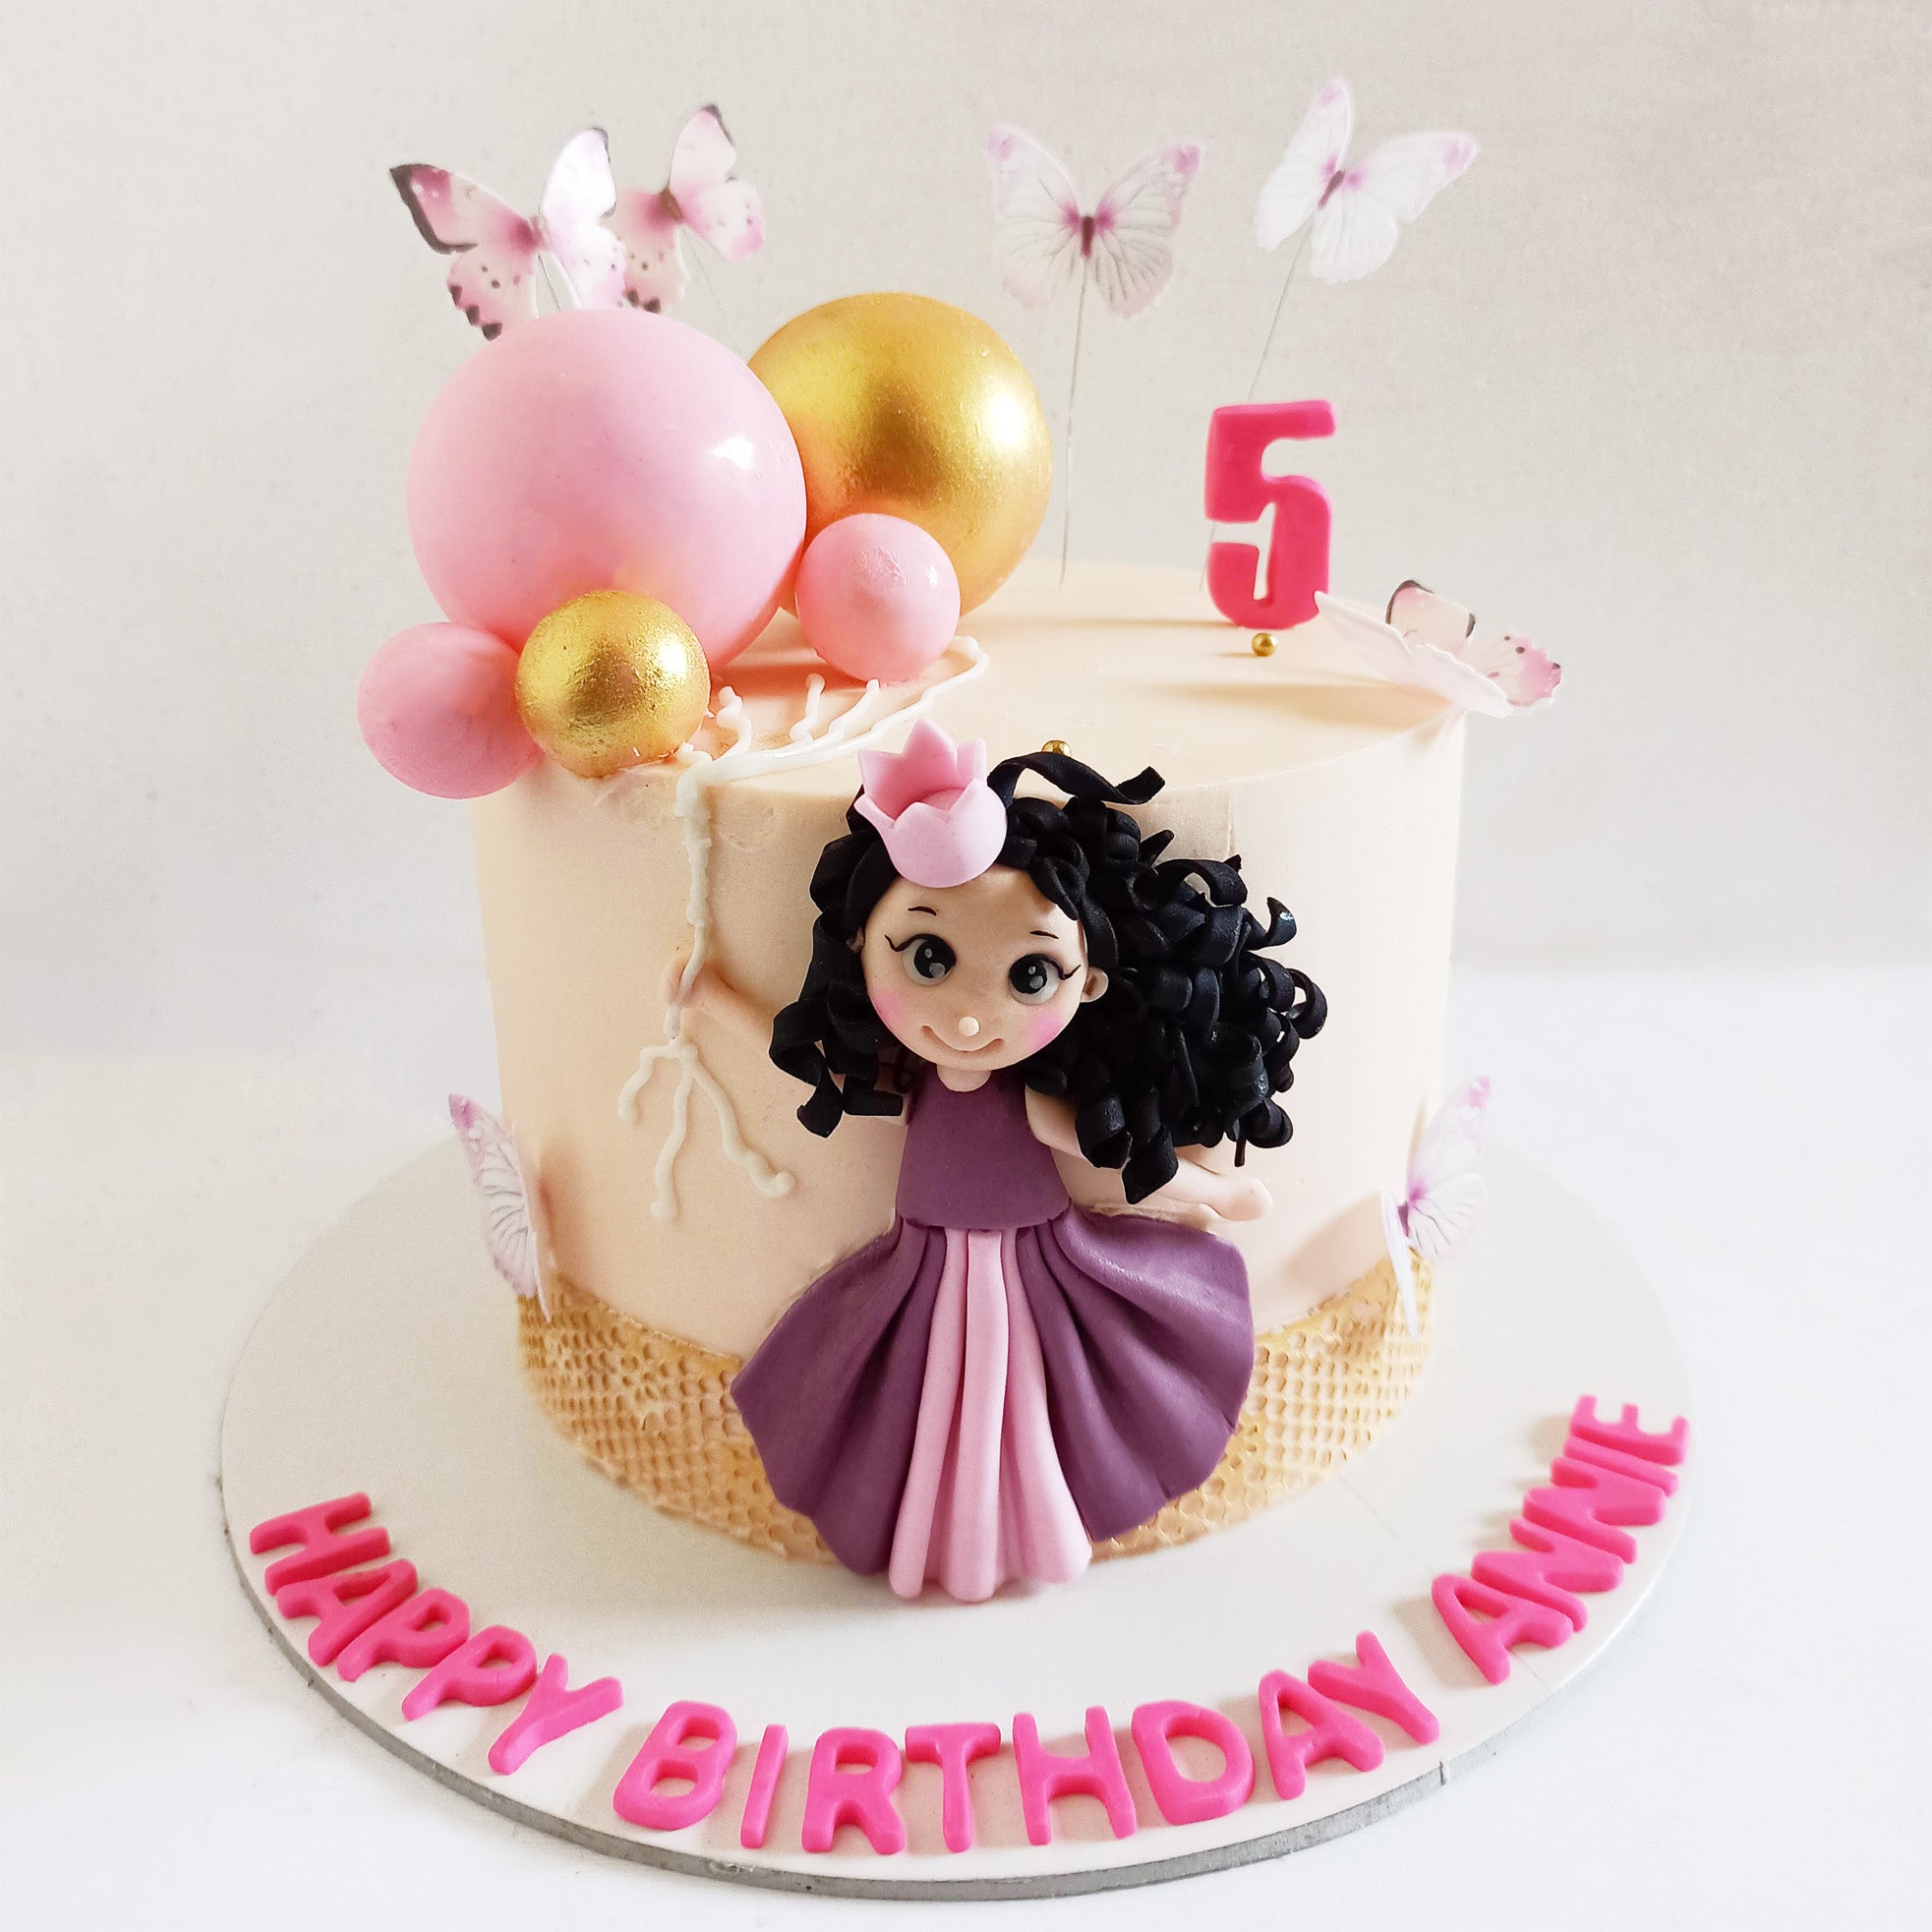 Buy Love Balloon Cake Online-Free Shipping | The Cakery Shop | Buy Now